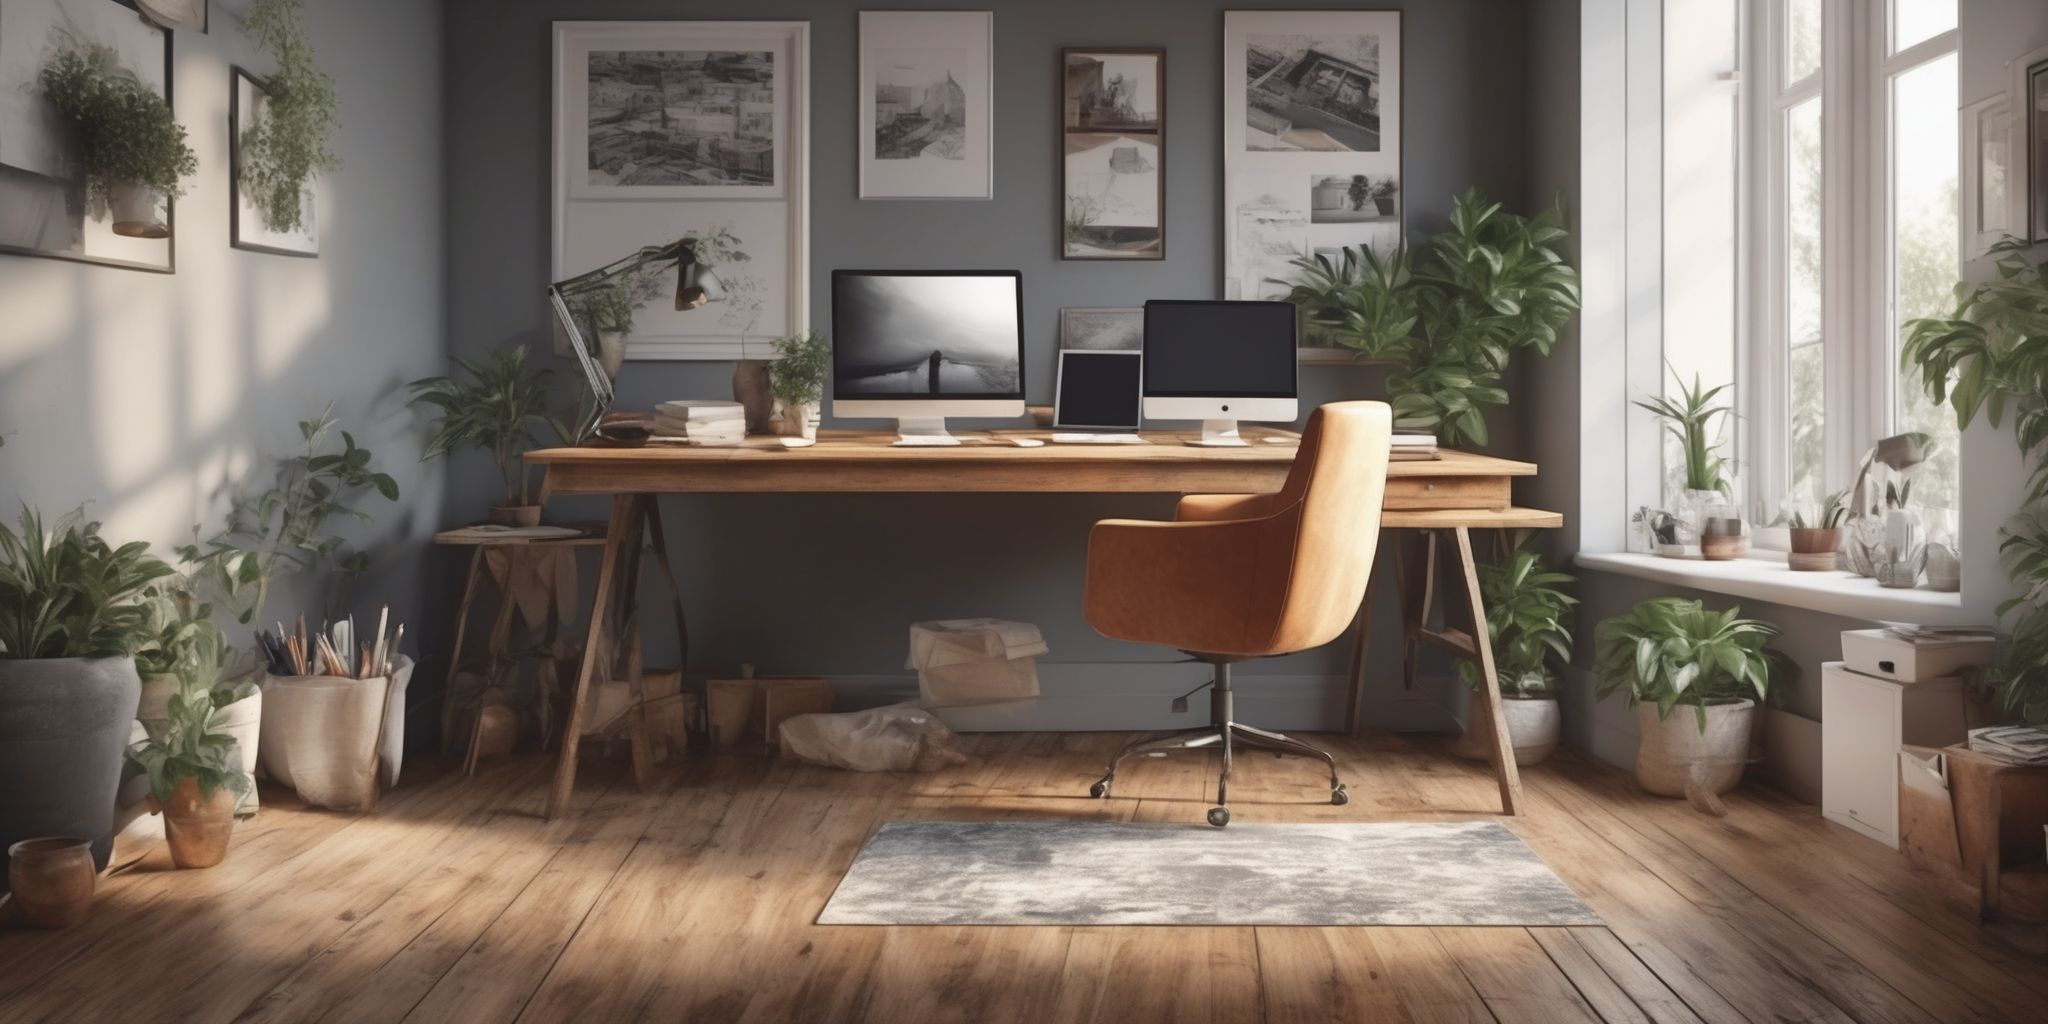 Home office  in realistic, photographic style